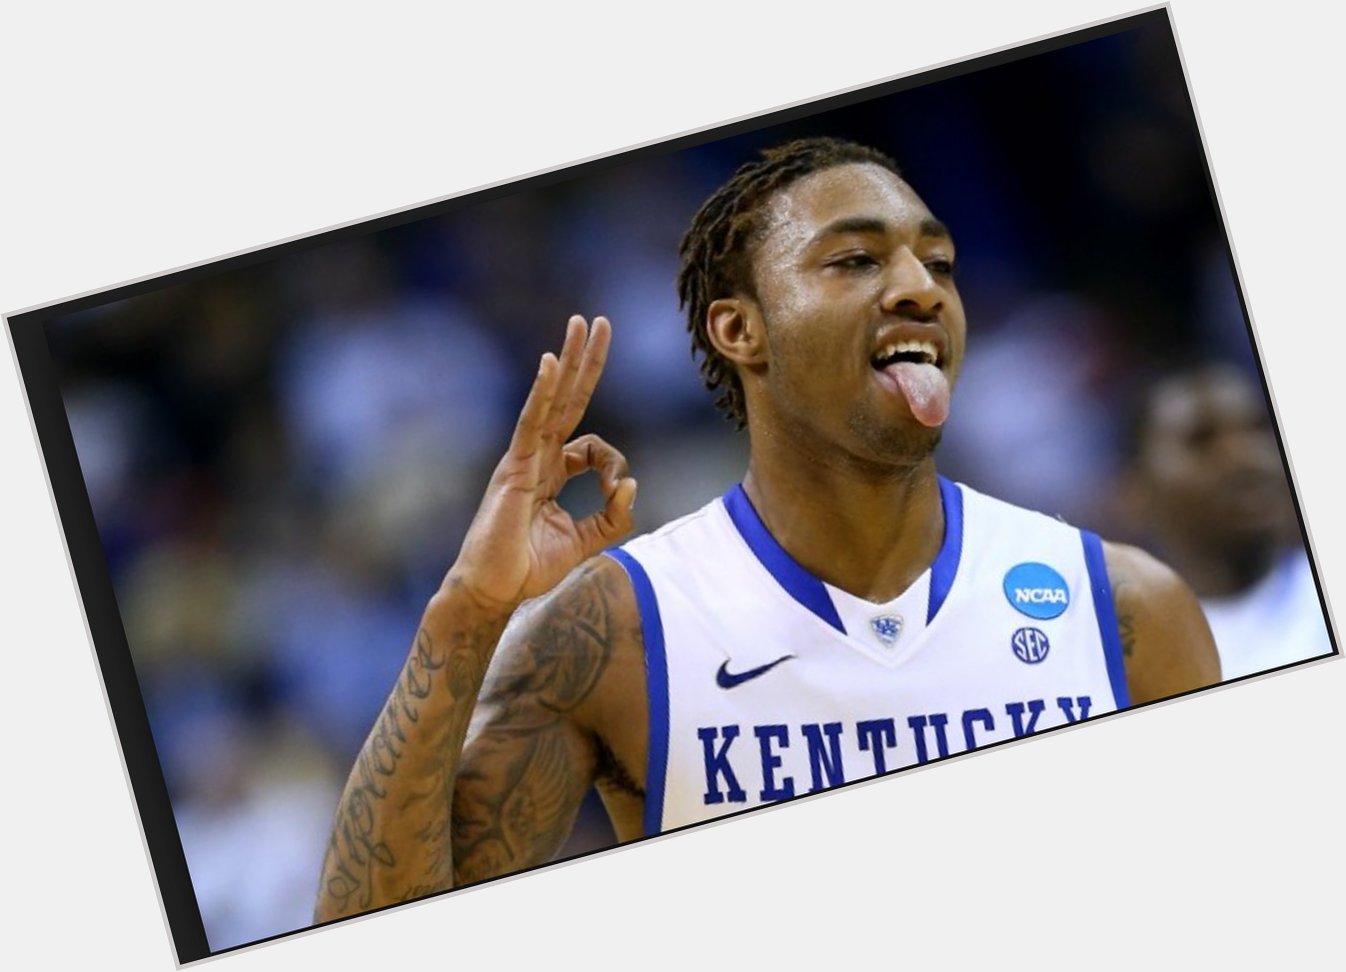 22 years old today. Kentucky --> Boston. Happy birthday to James Young! 